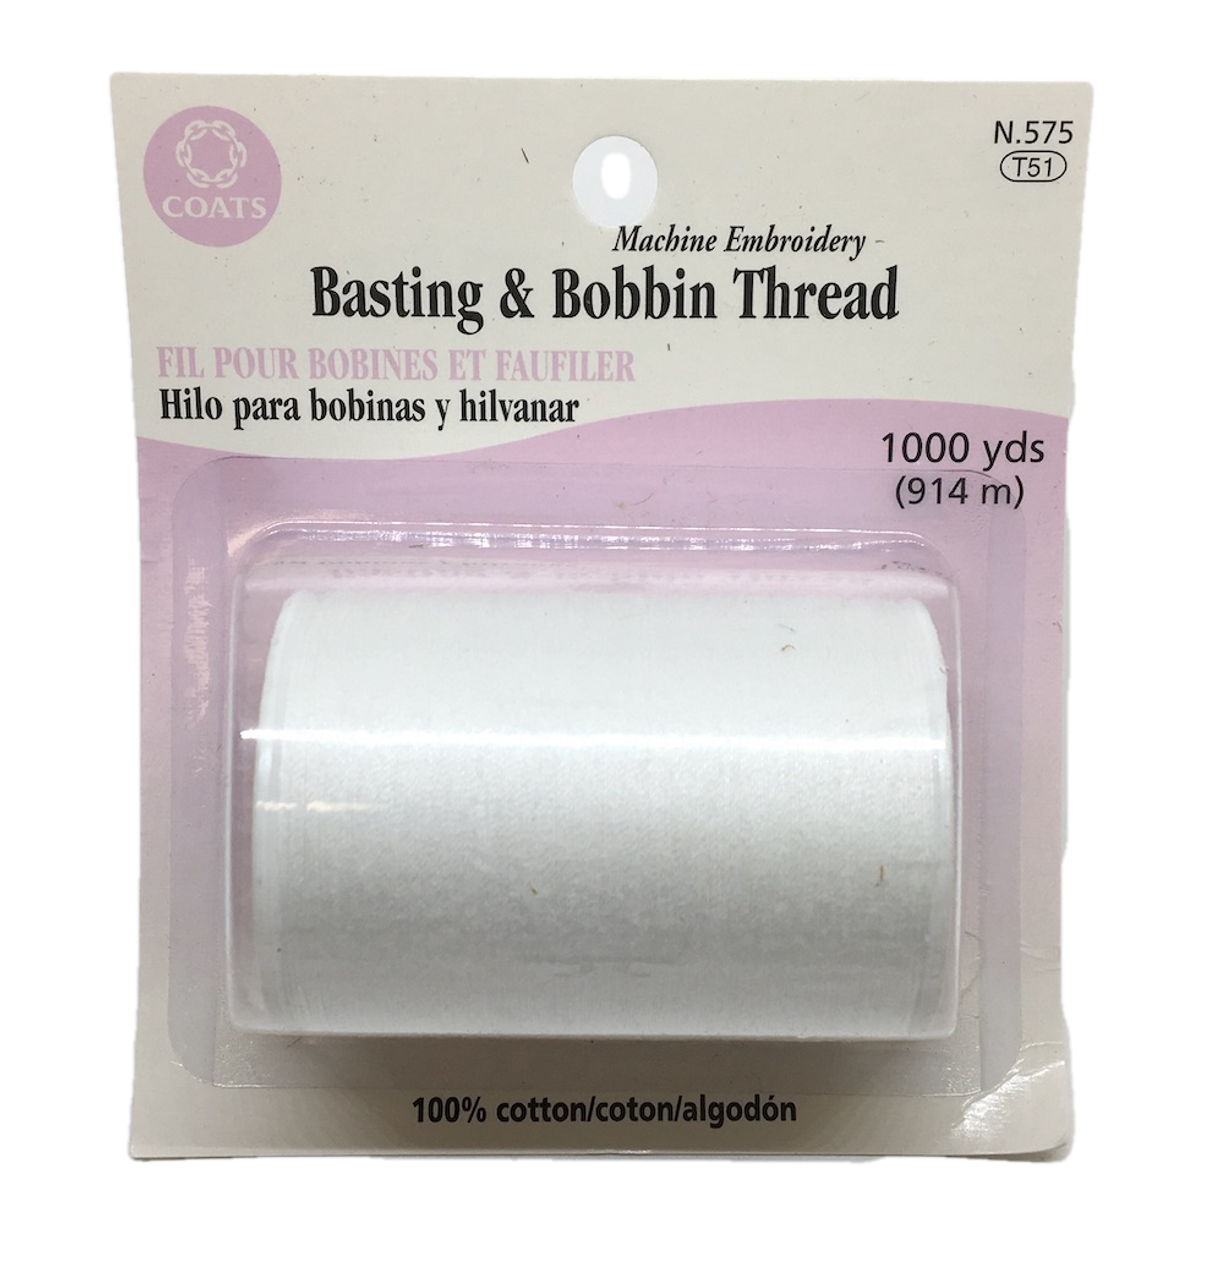 Coats Sewing, Quilting, Embroidery Basting & Bobbin Thread 1000 yds.